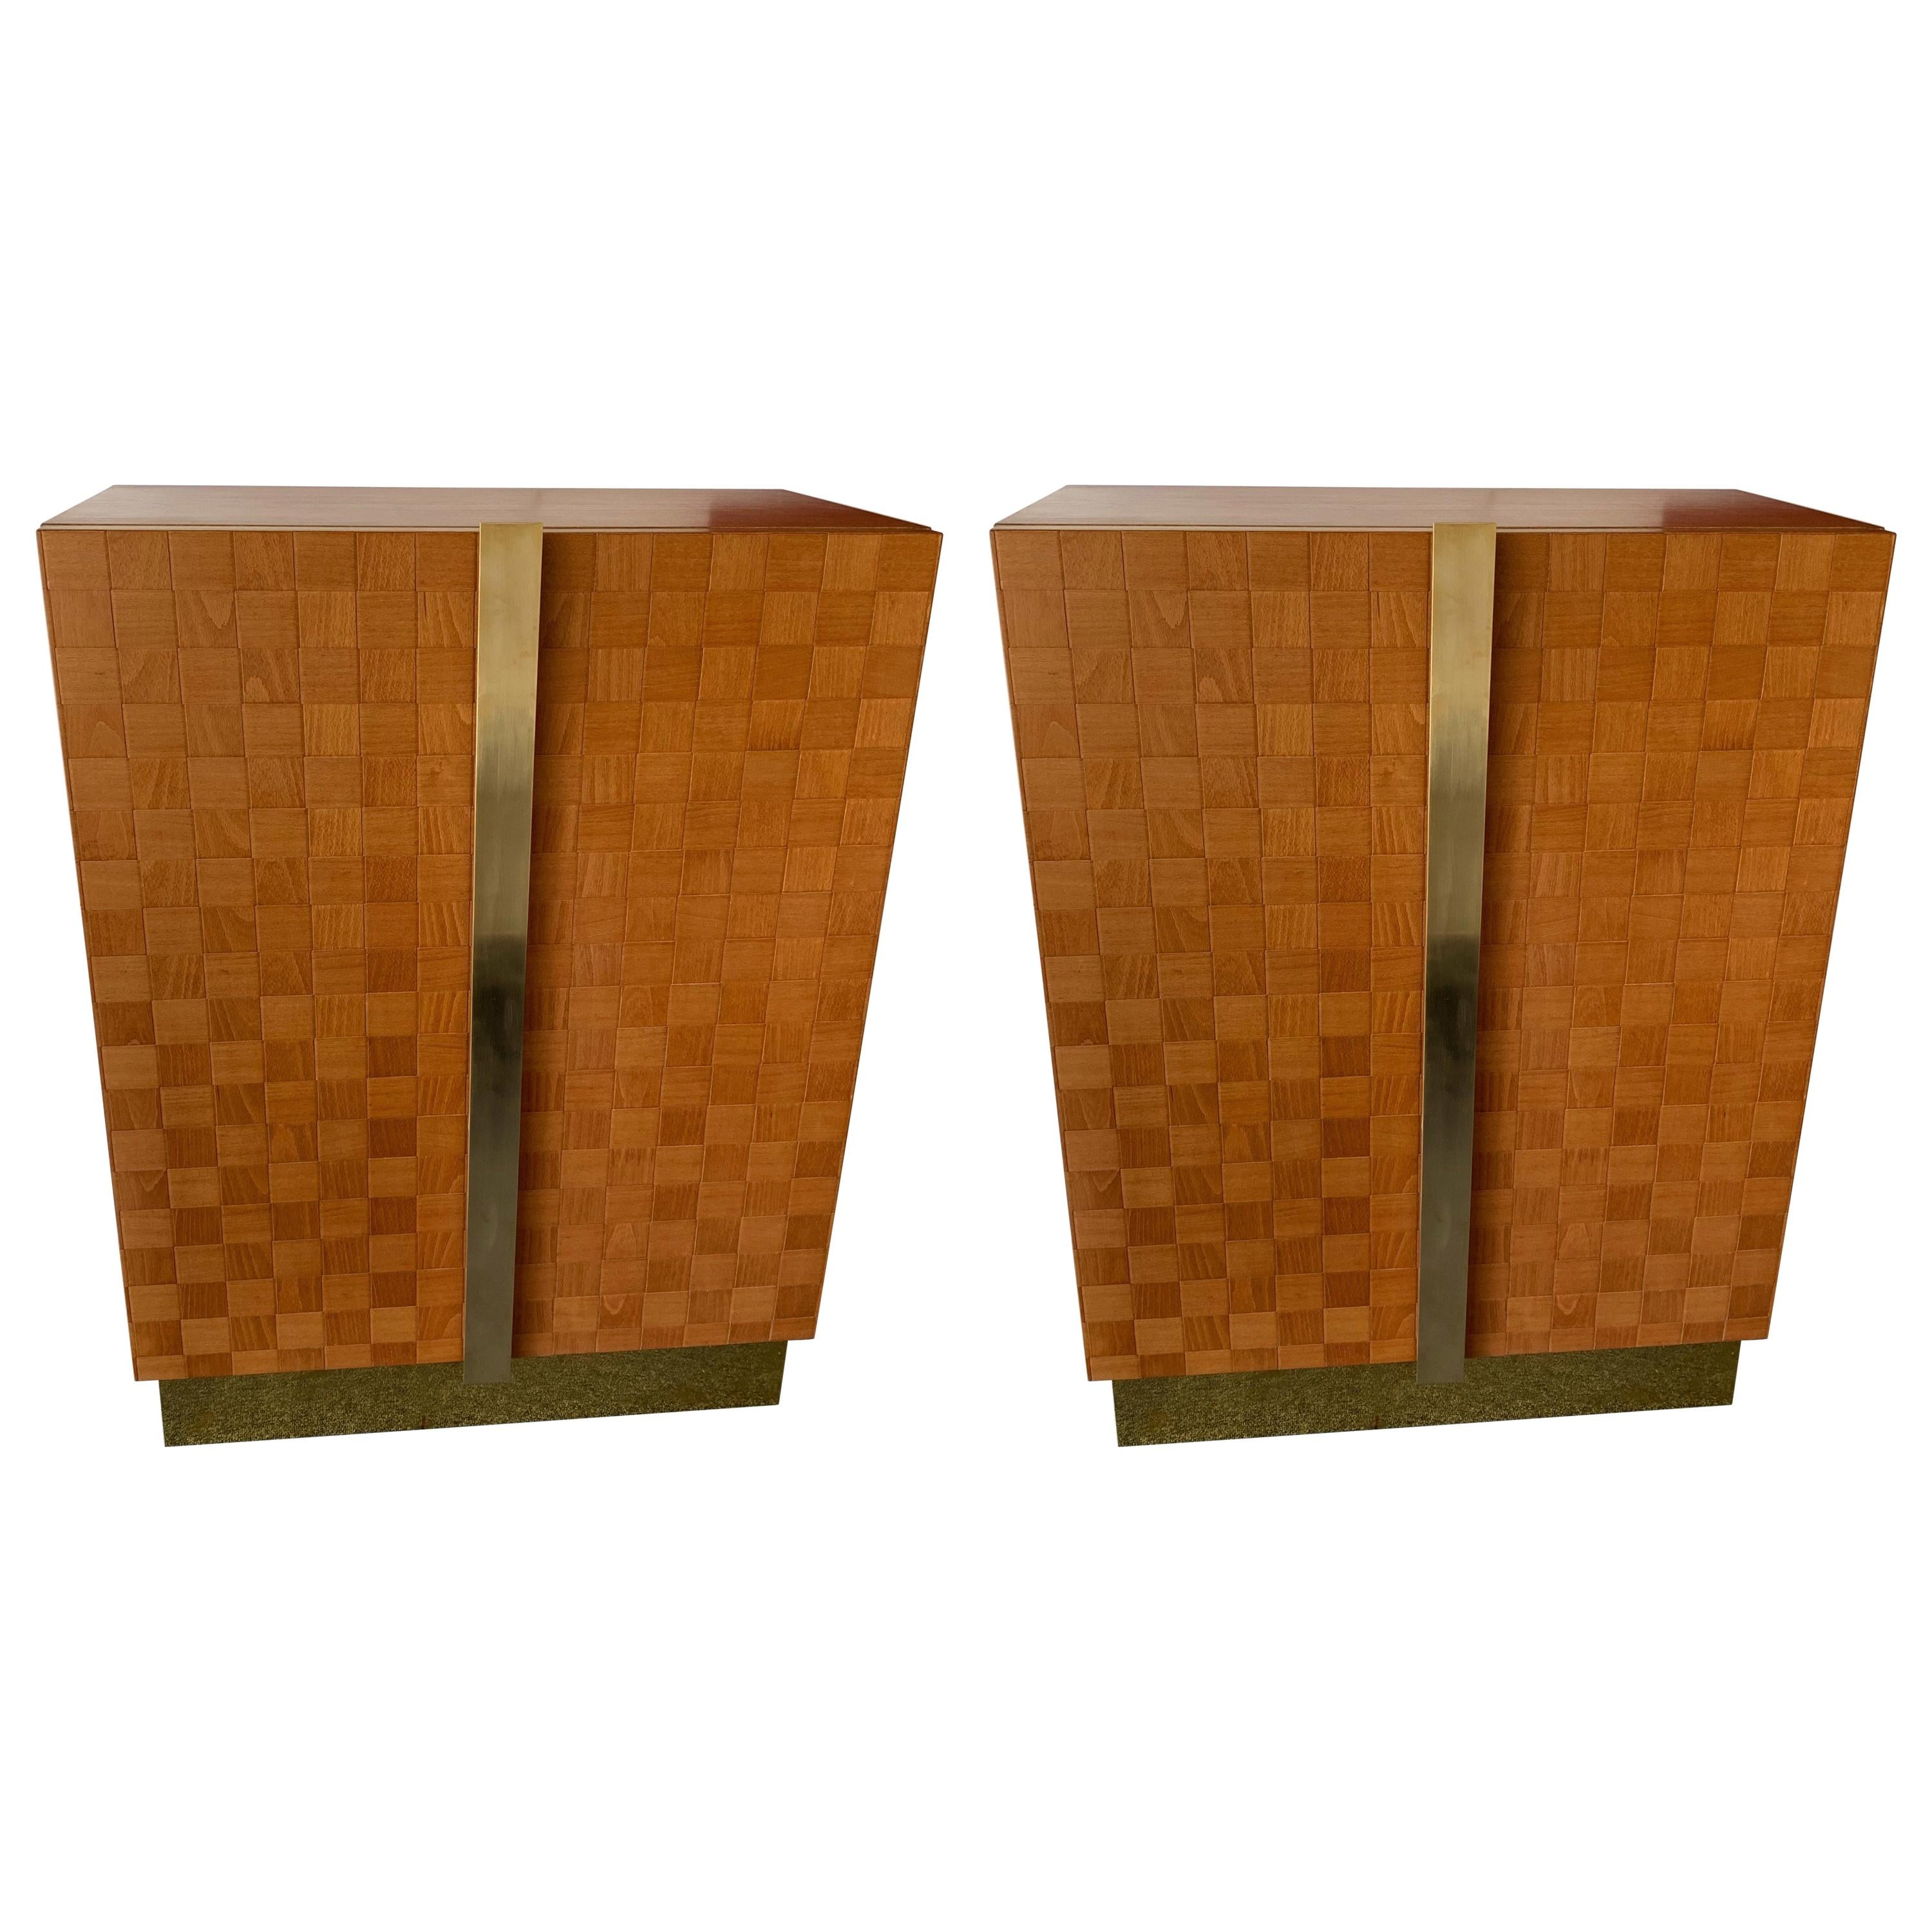 Pair of Wood and Brass Cabinets by Giorgetti. Italy, 1980s